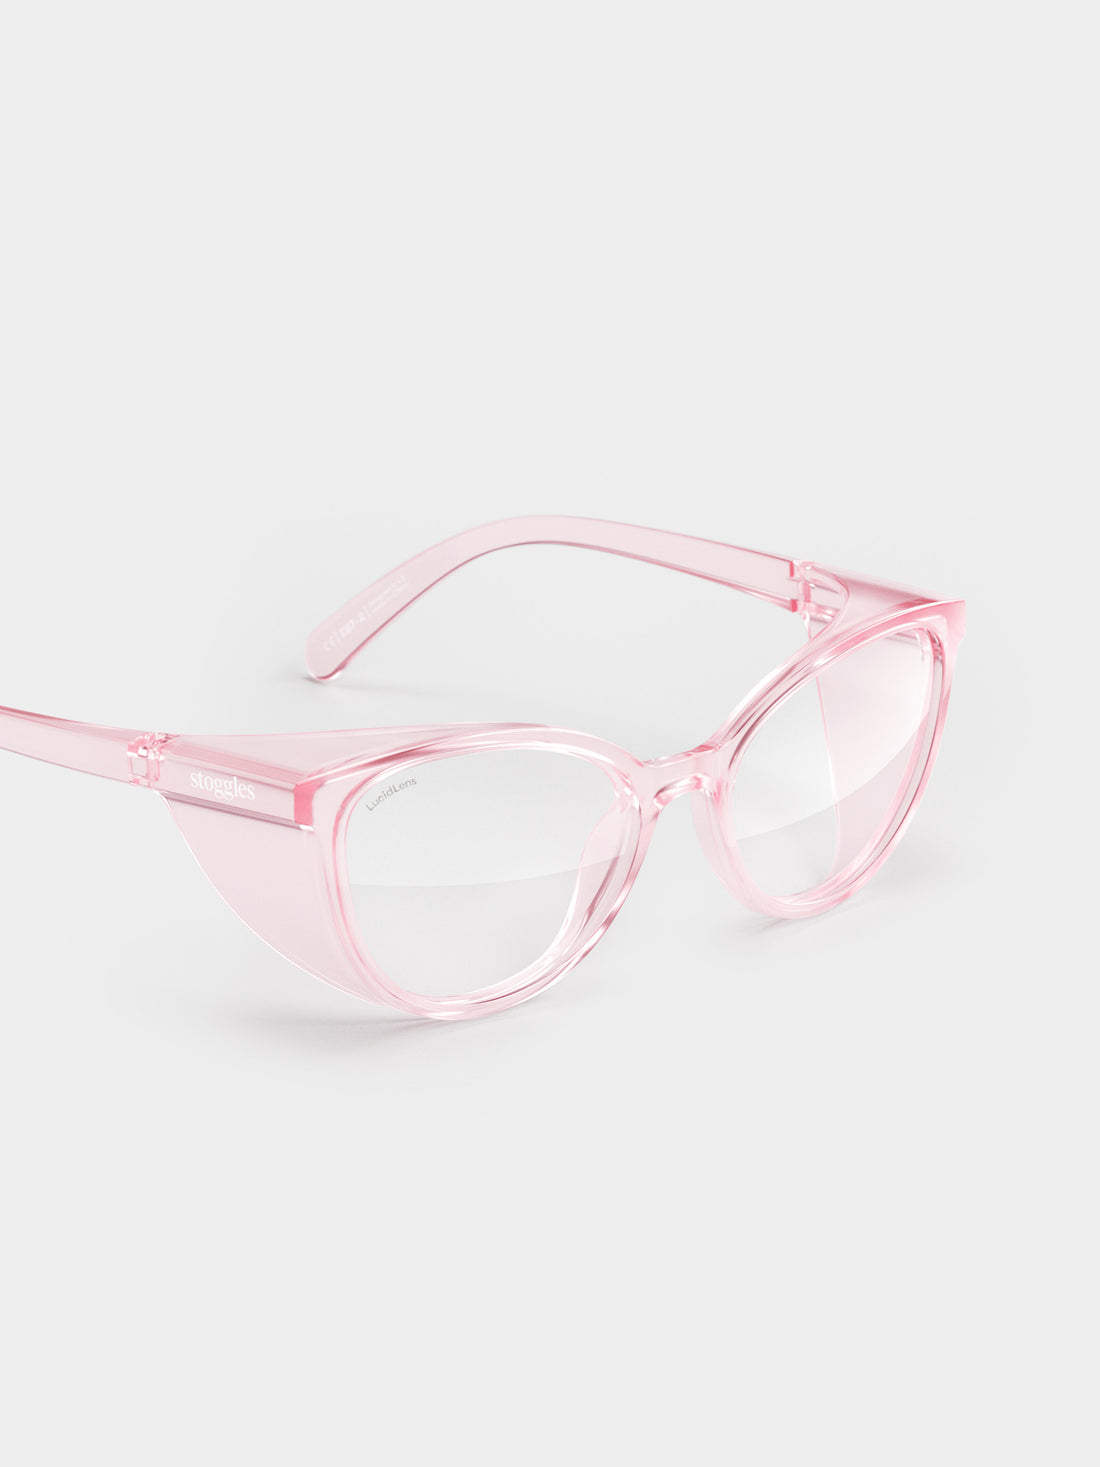 Cat Eye Safety Glasses | Stoggles Inc. Clear / Medium / Dimmers